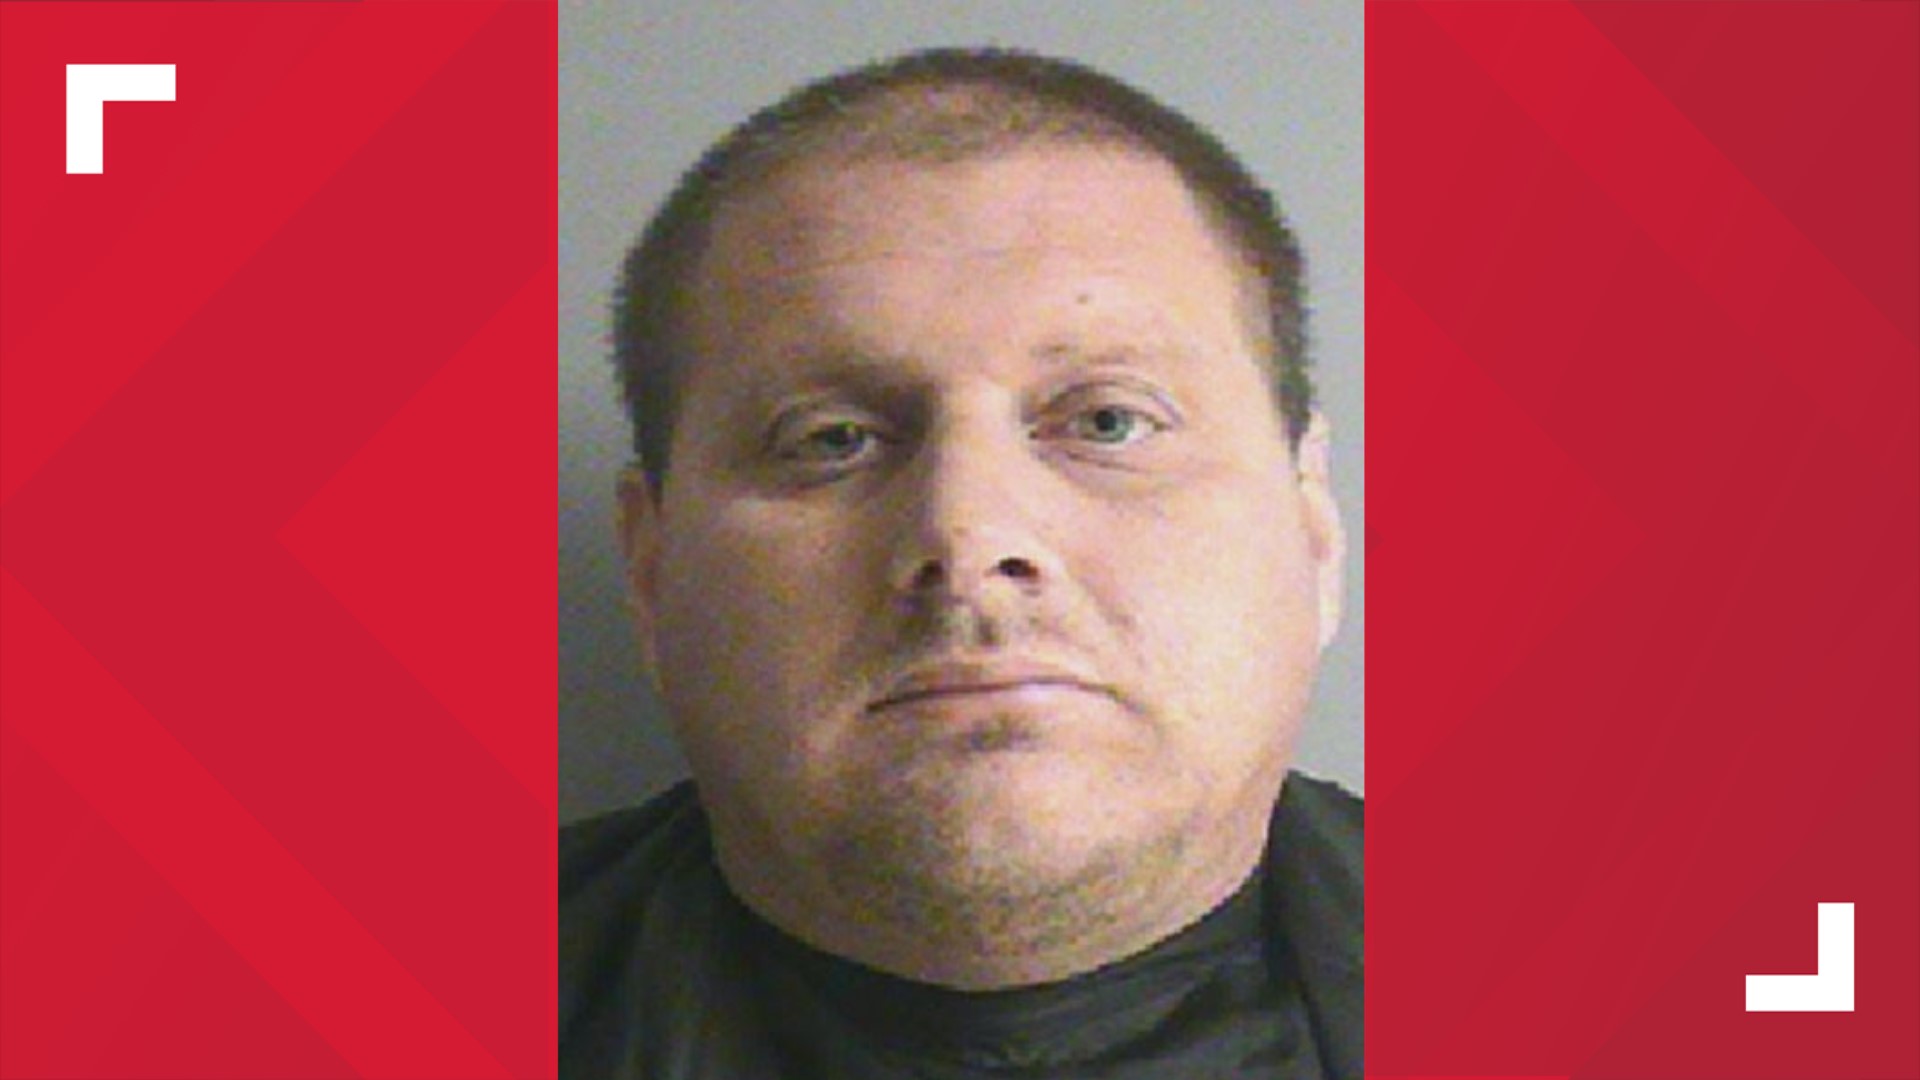 An Aramark employee contracted for an El Campo ISD elementary school was arrested Tuesday after maintenance workers found a small camera hidden in the bathroom.